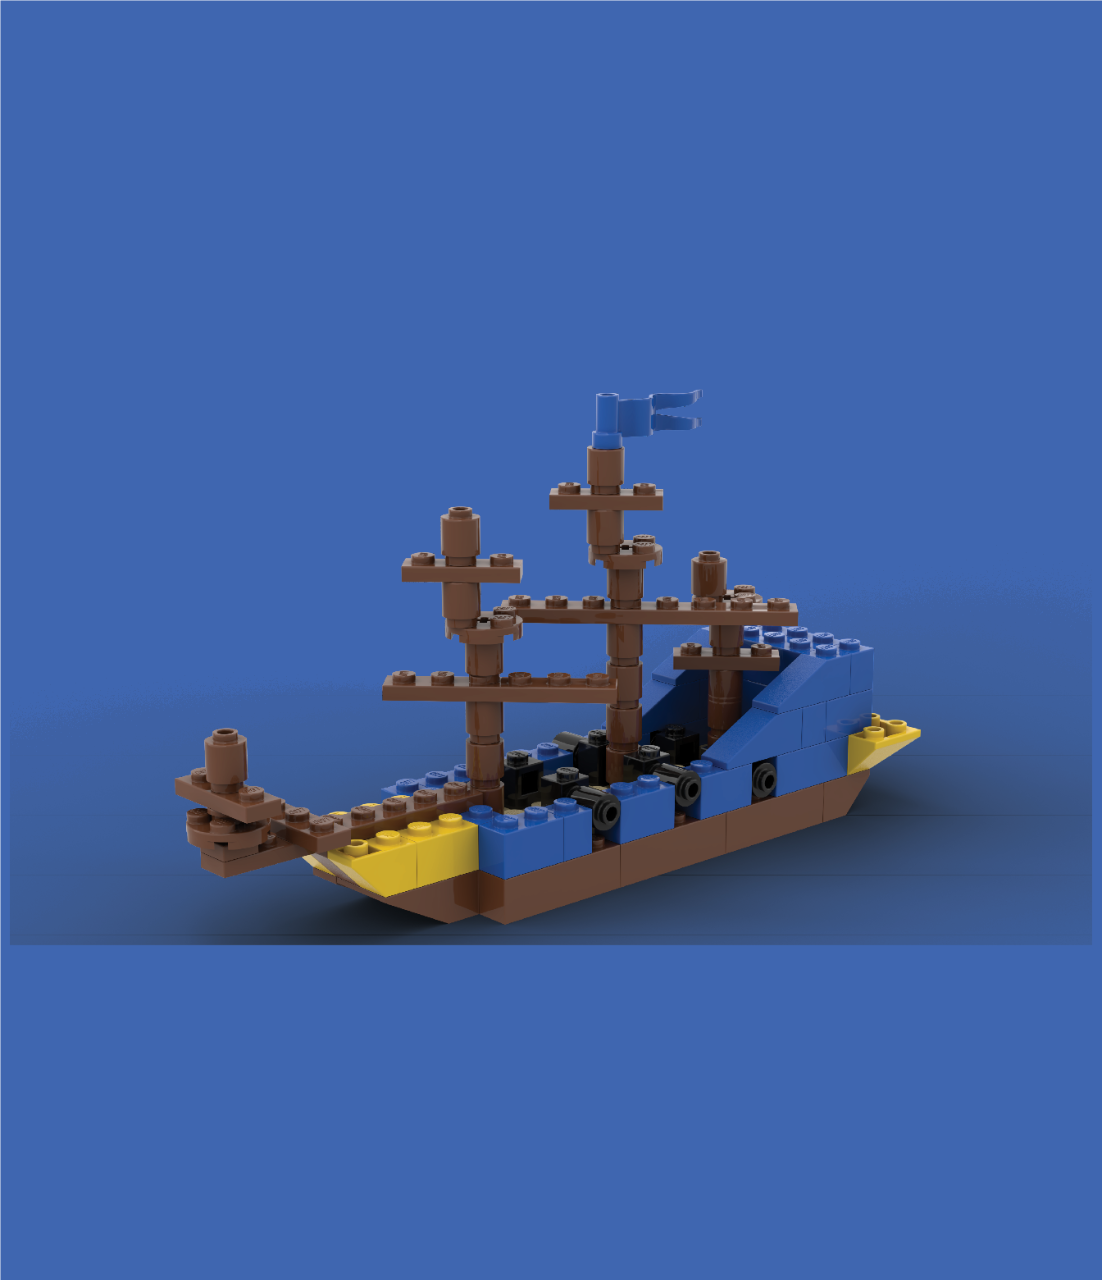 LEGO Stitch Ship Created by - Beyond the Brick